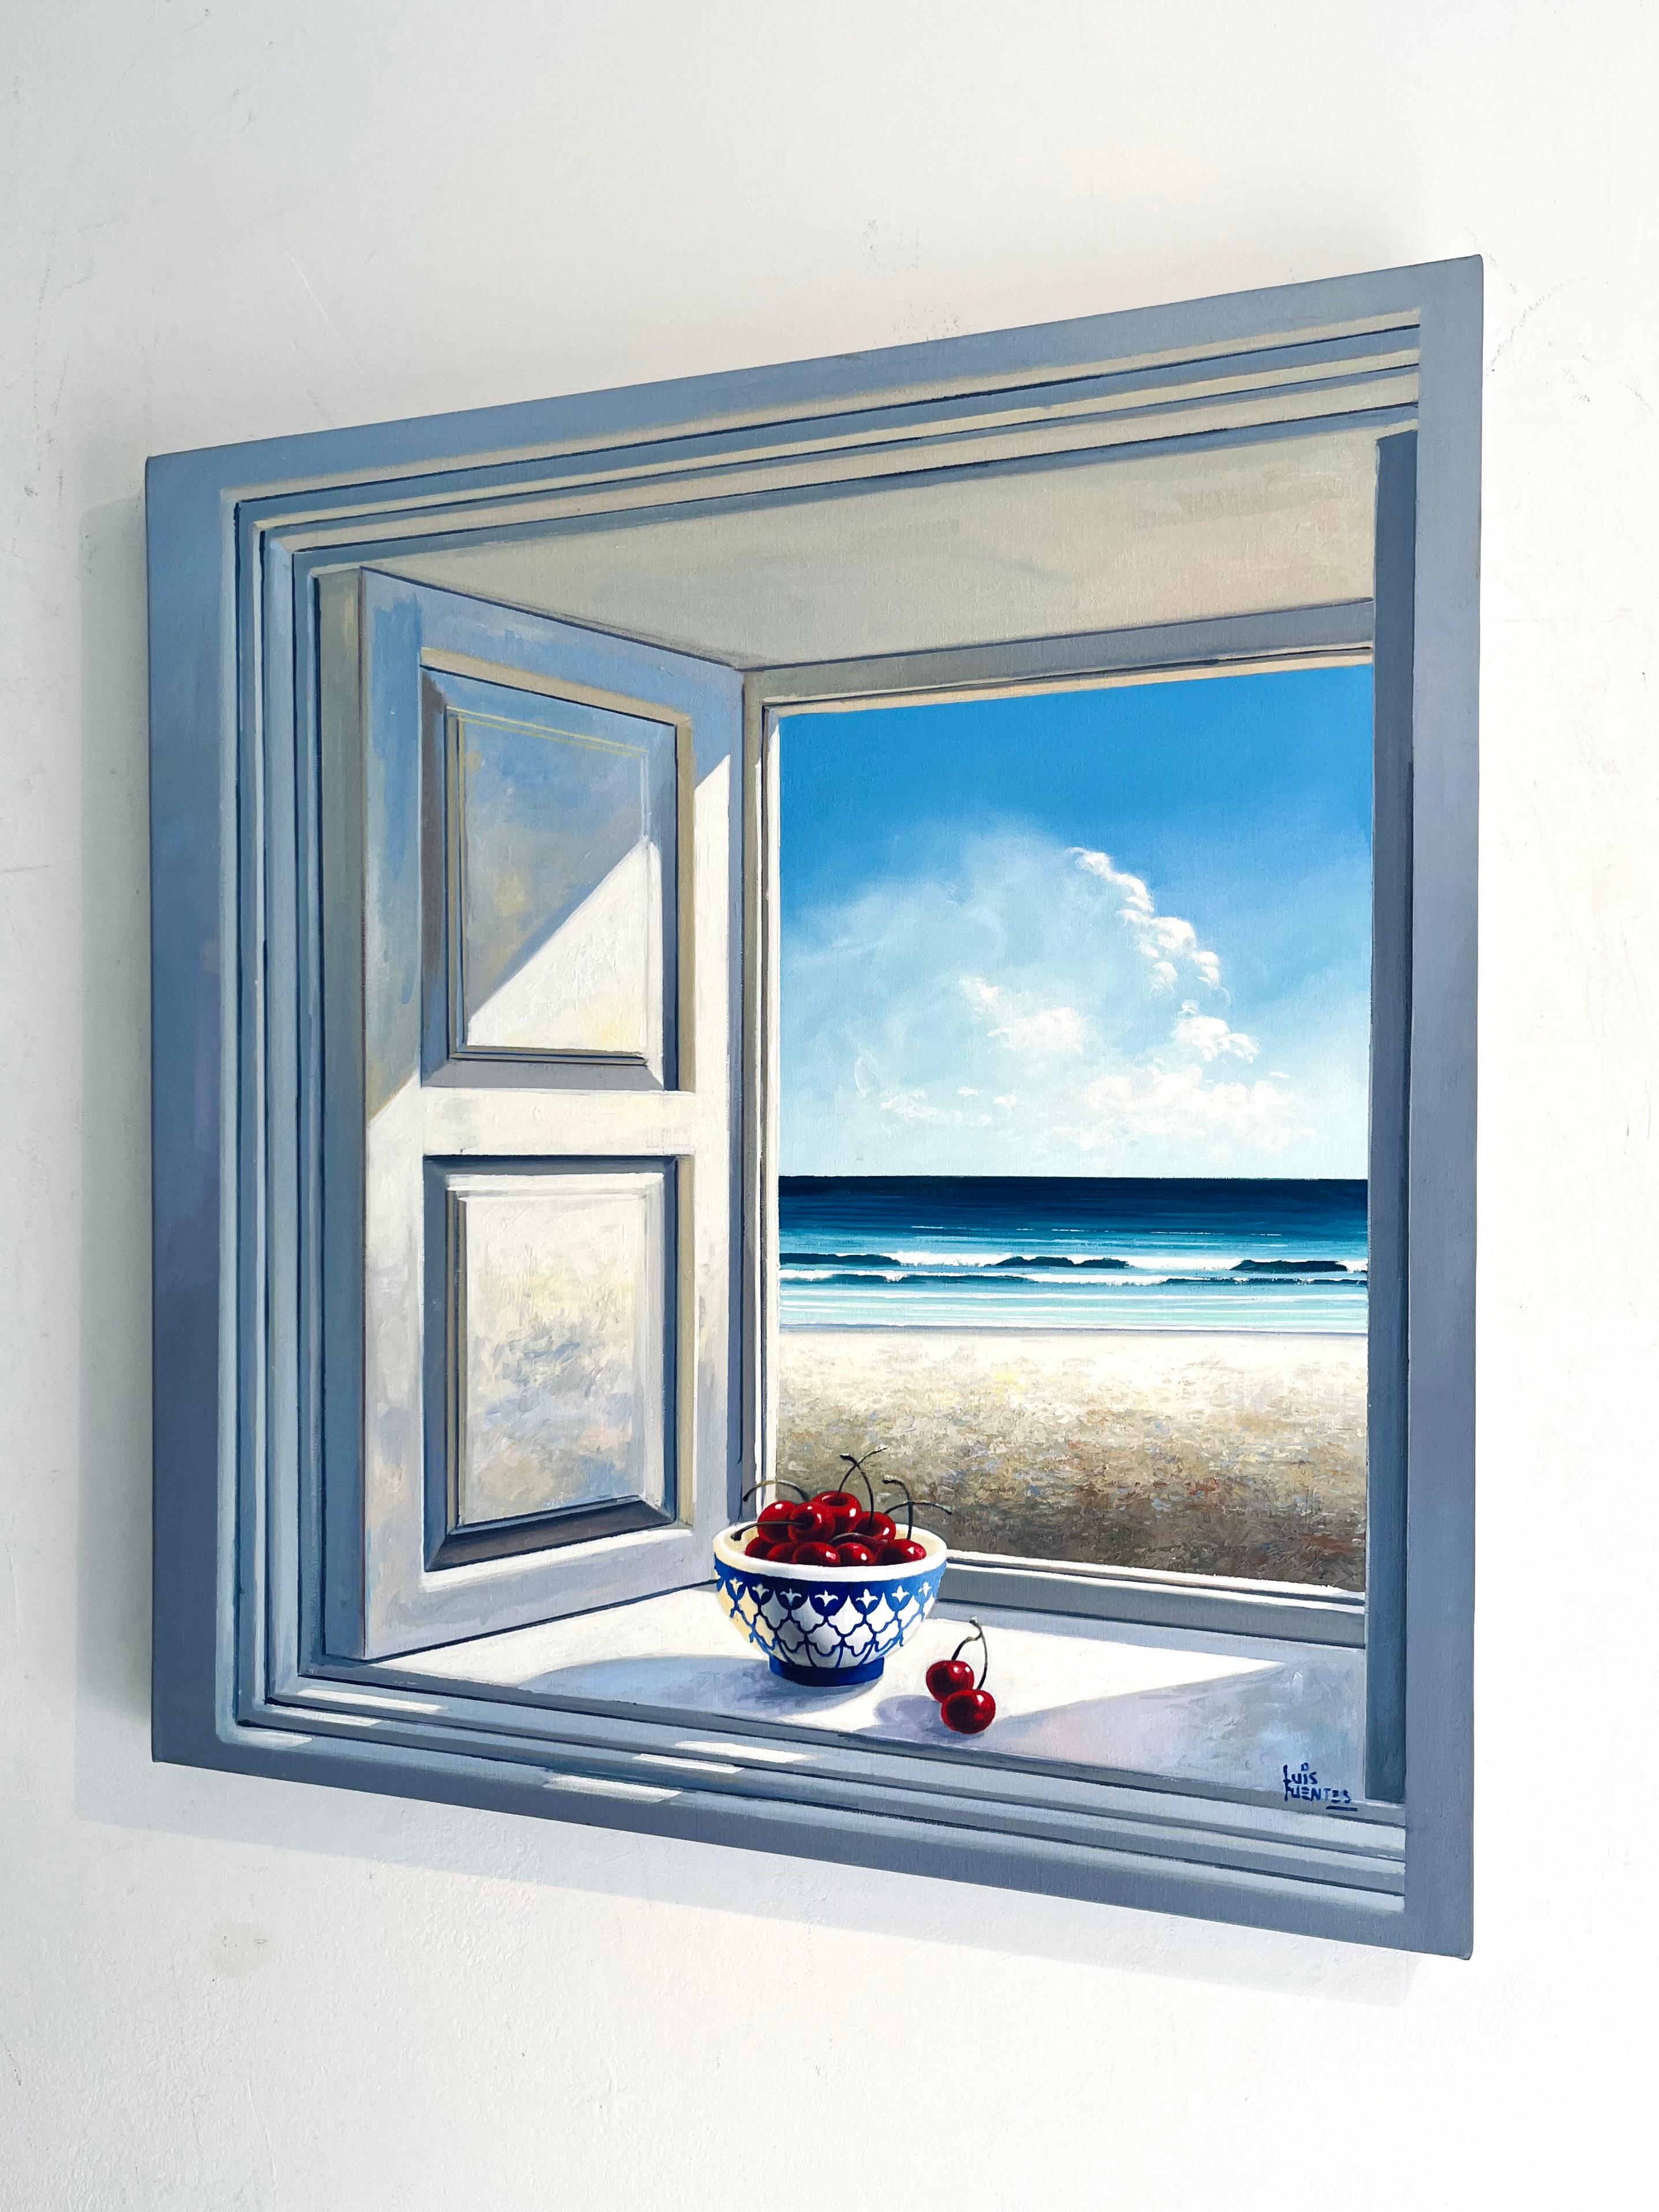 Serenity-original surreal realism seascape-still life painting-contemporary Art - Painting by Luis Fuentes